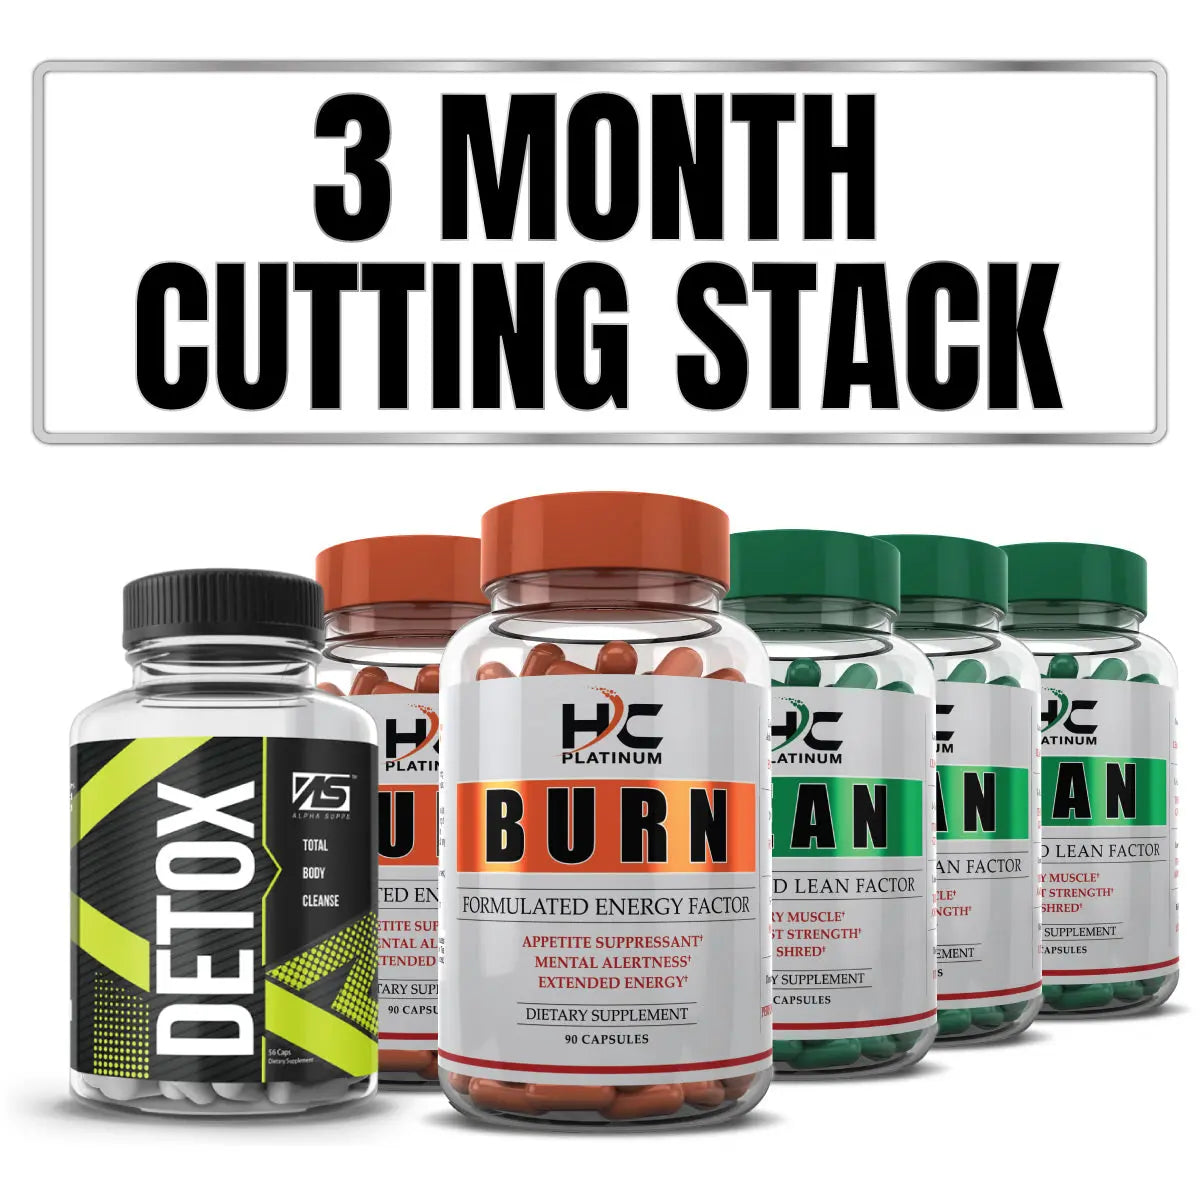 3 MONTH CUTTING STACK Optimal Nutrition & Supps